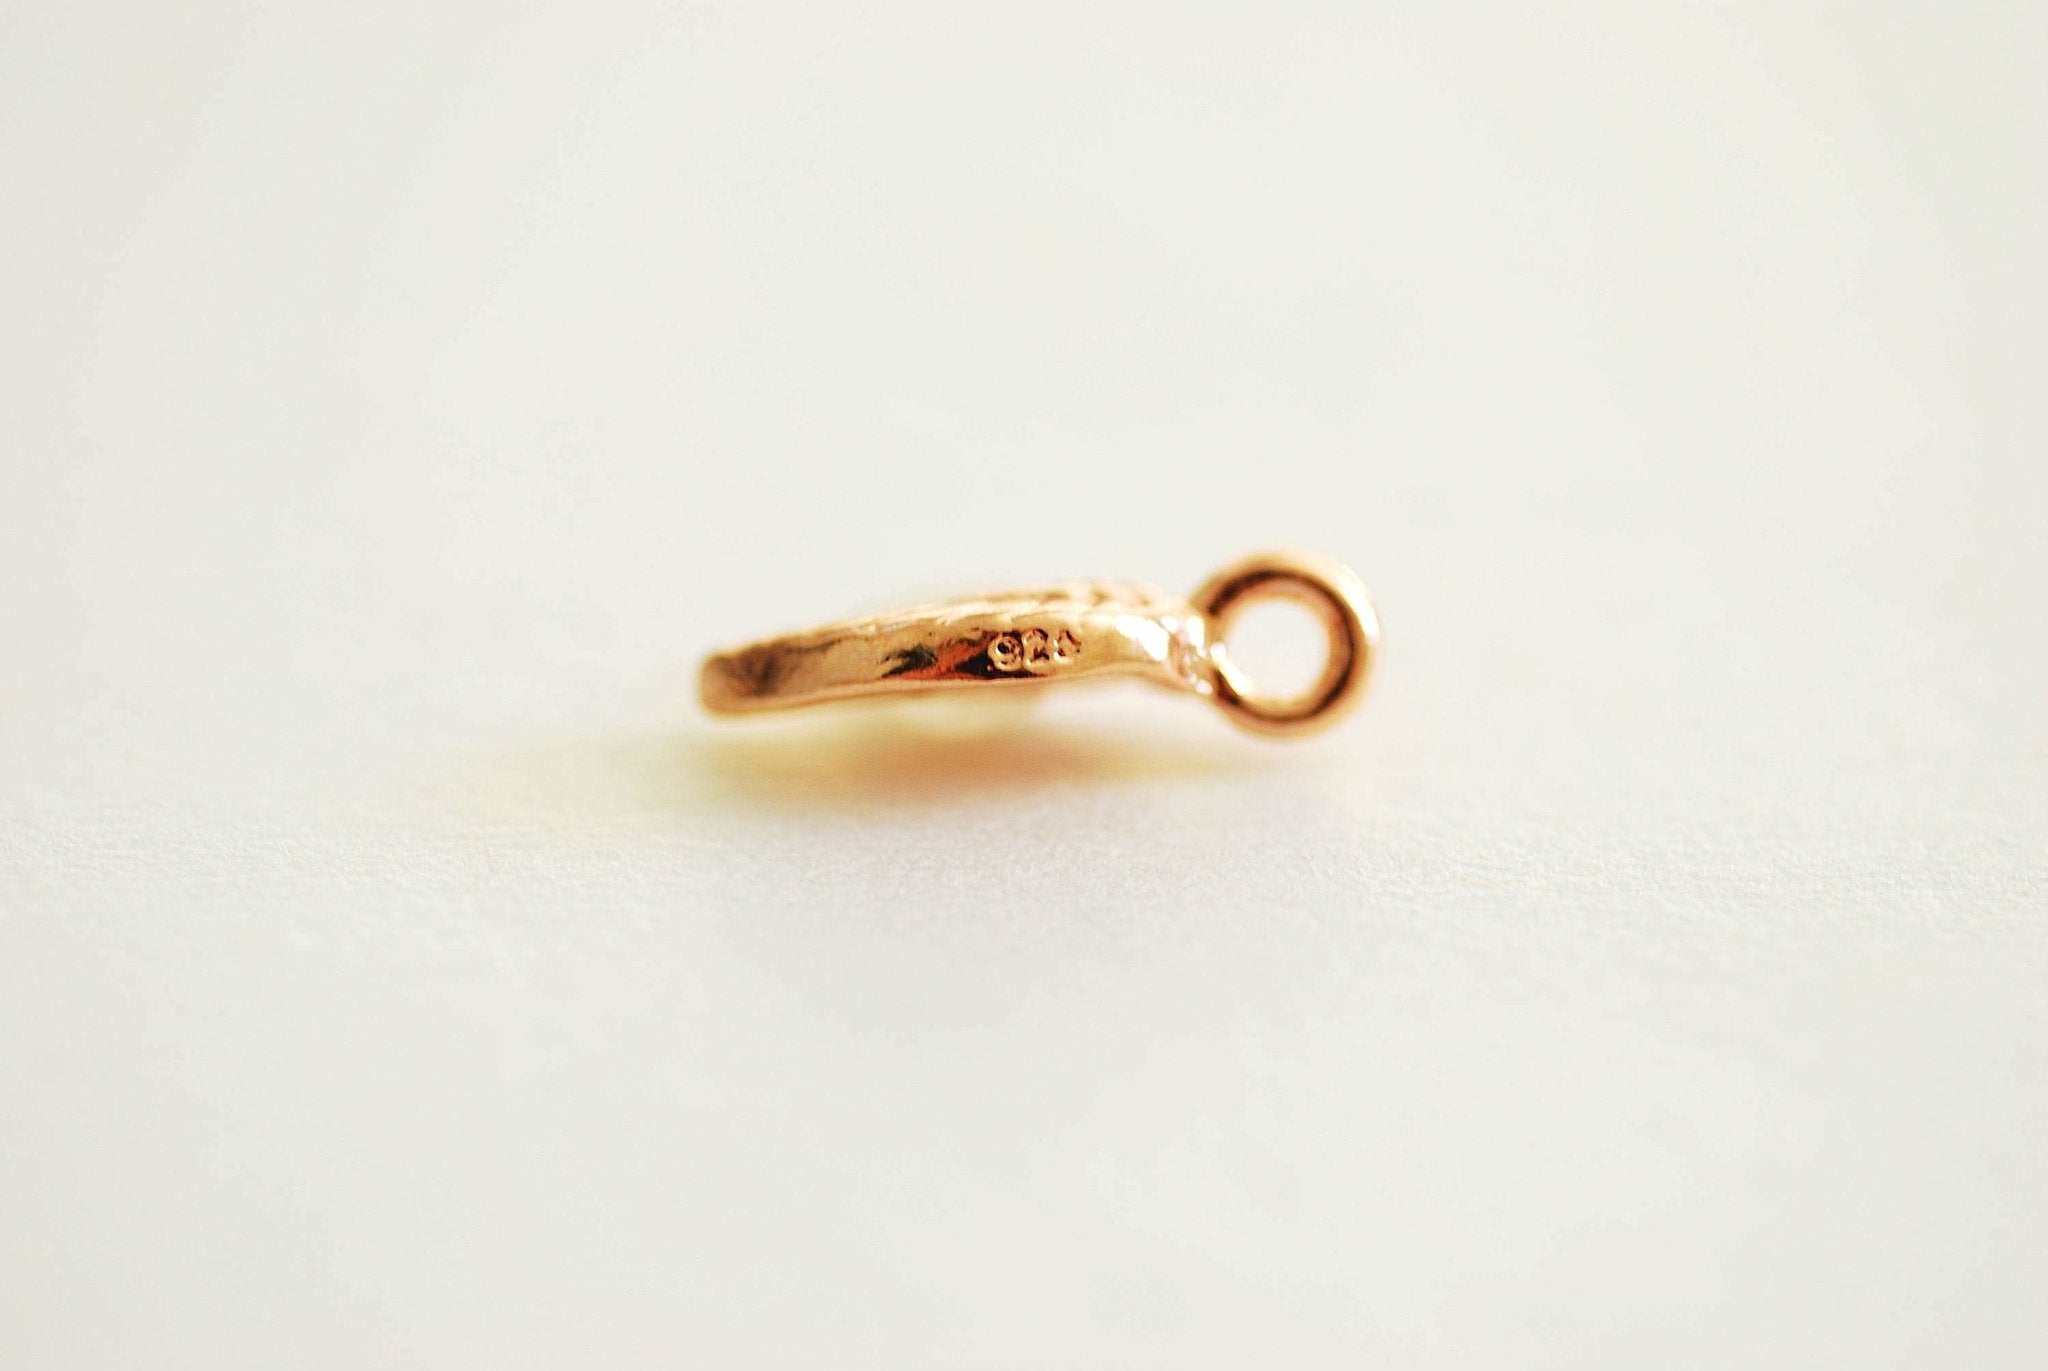 Angel Wing Charm, Vermeil Gold-Plated 925 Sterling Silver, 16mm x 15mm, Tiny Feather Charm, Angel Feather